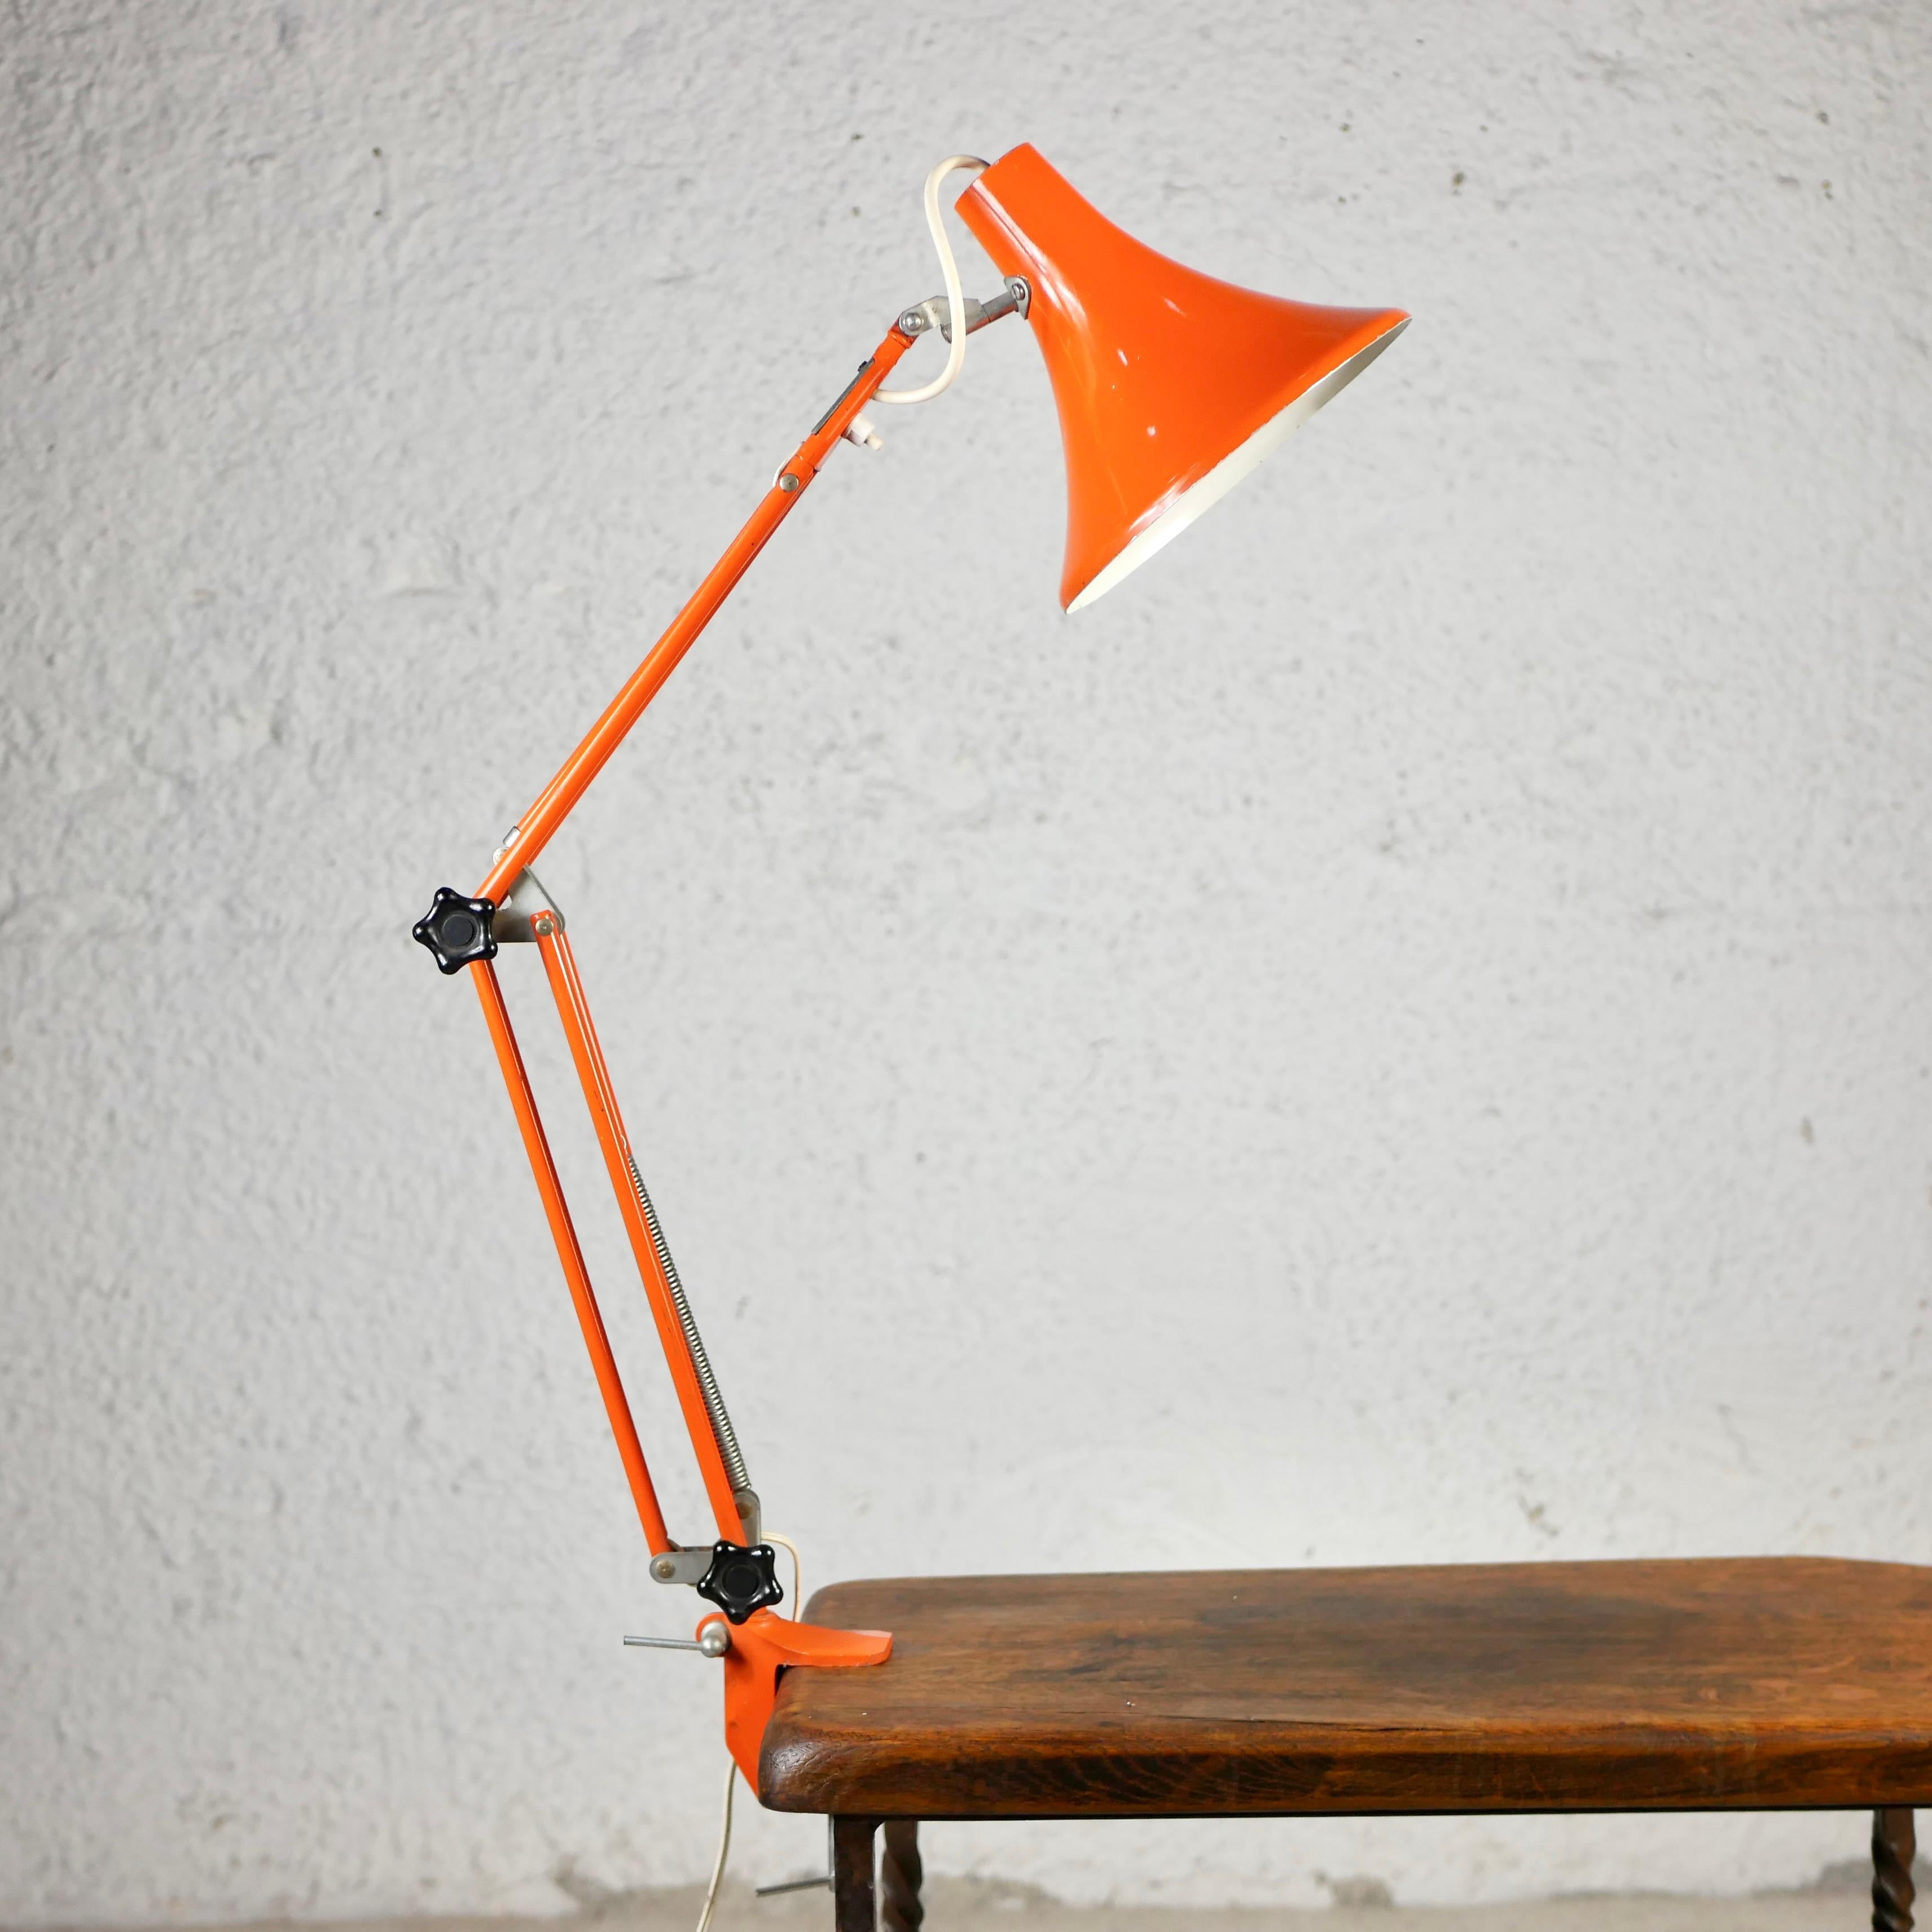 Beautiful orange desklamp from France, made in the 1970s.
Adjustable and orientable, very practical and fun.
Dimensions : approx H71, lampshade D20 W18
Good condition, light scratches